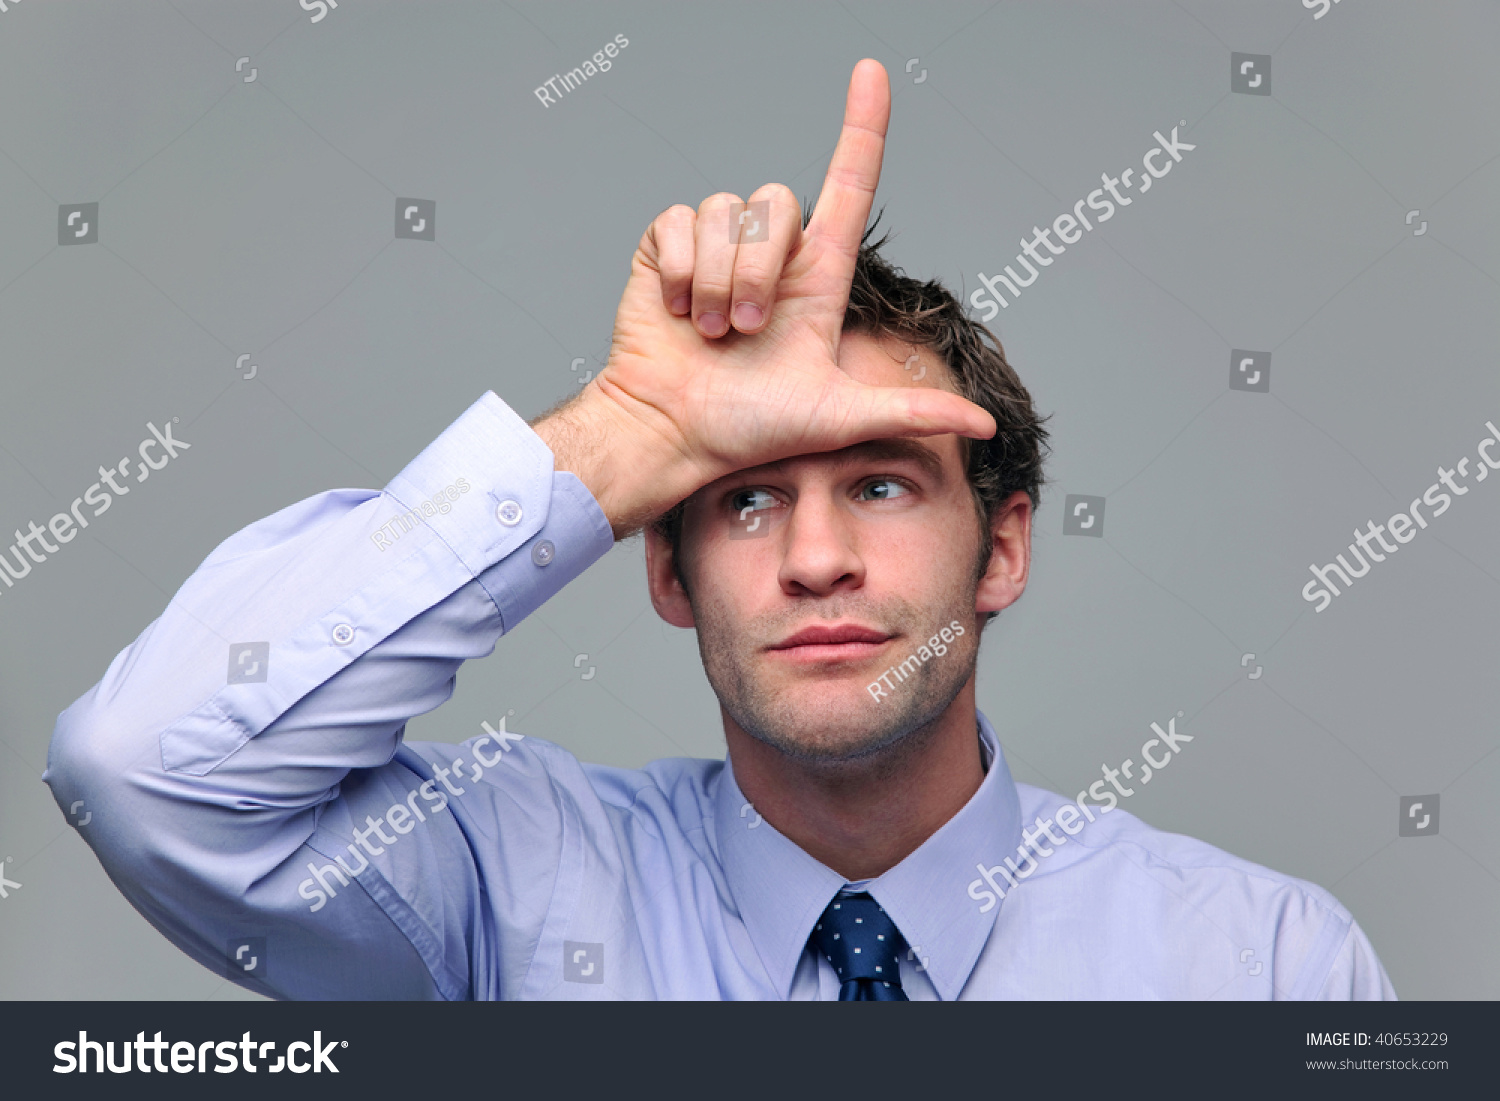 stock-photo-businessman-making-a-loser-gesture-with-his-hand-40653229.jpg